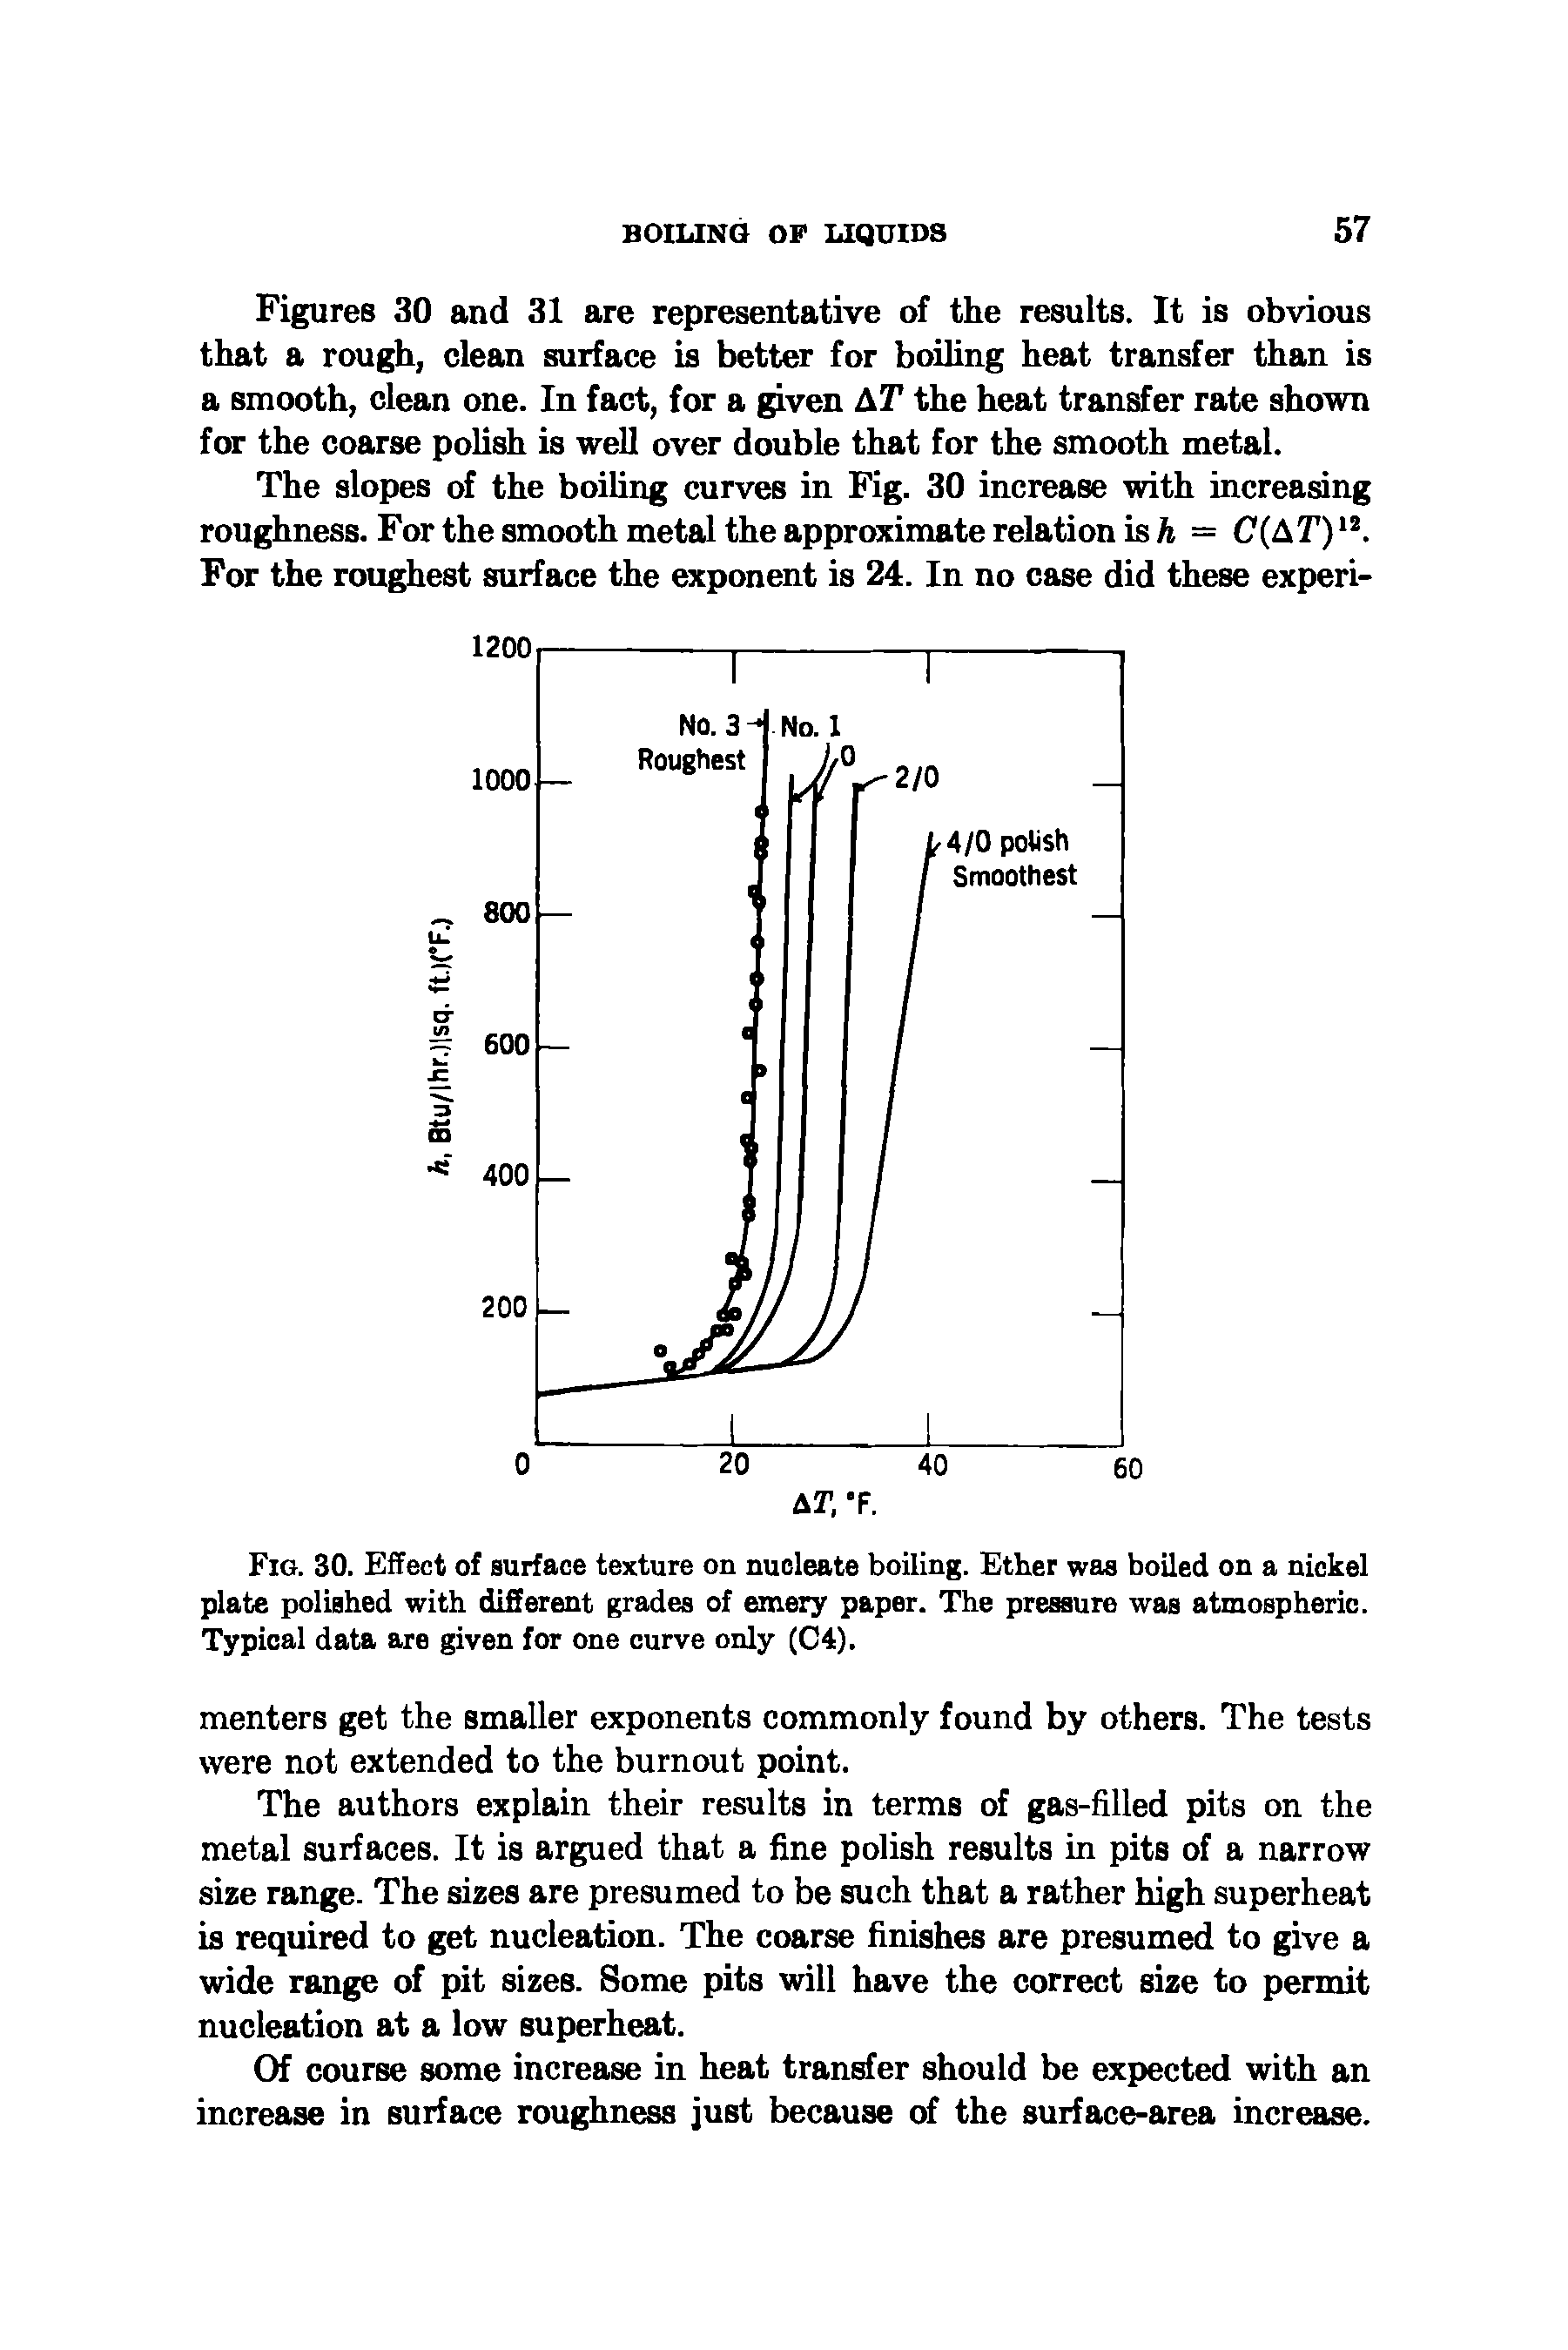 Fig. 30. Effect of surface texture on nucleate boiling. Ether was boiled on a nickel plate polished with different grades of emery paper. The pressure was atmospheric. Typical data are given for one curve only (C4).